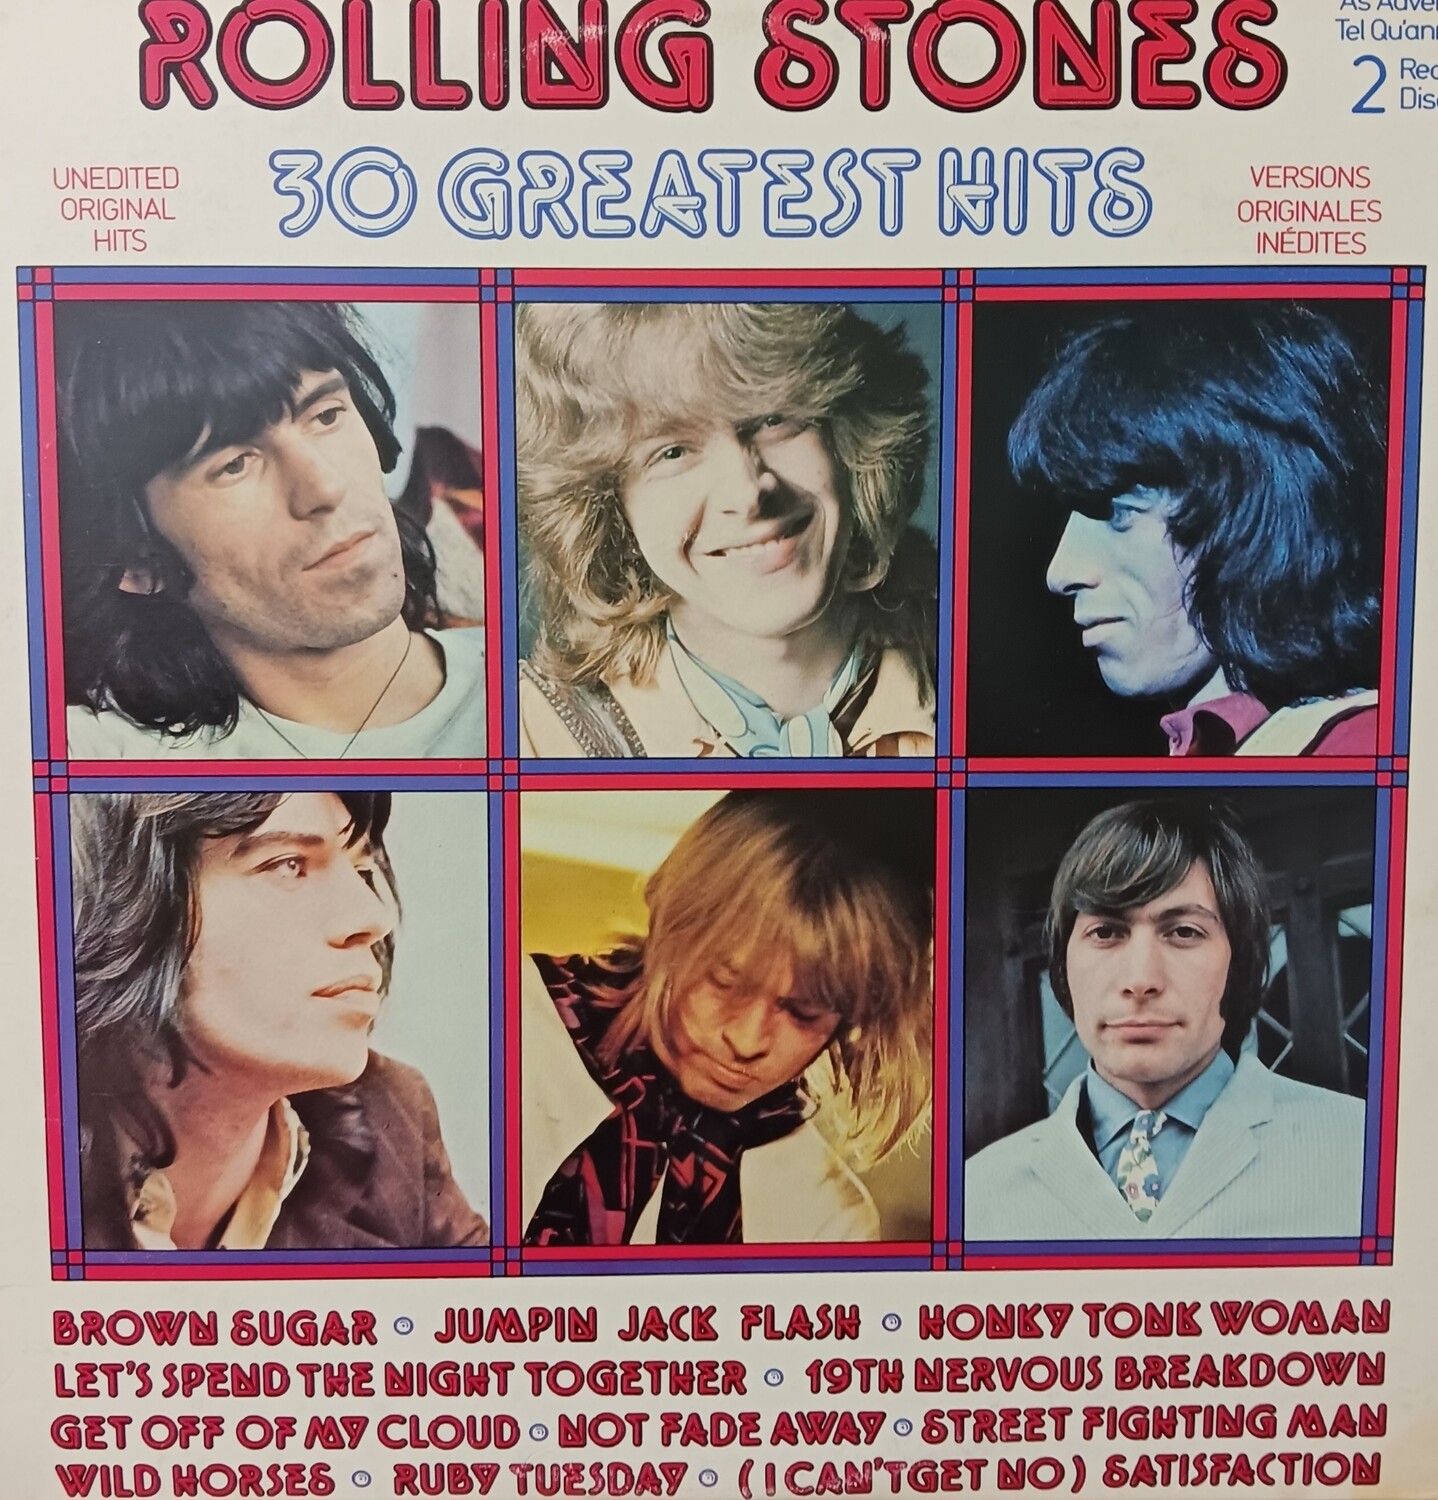 THE ROLLING STONES - 30 Greatest Hits